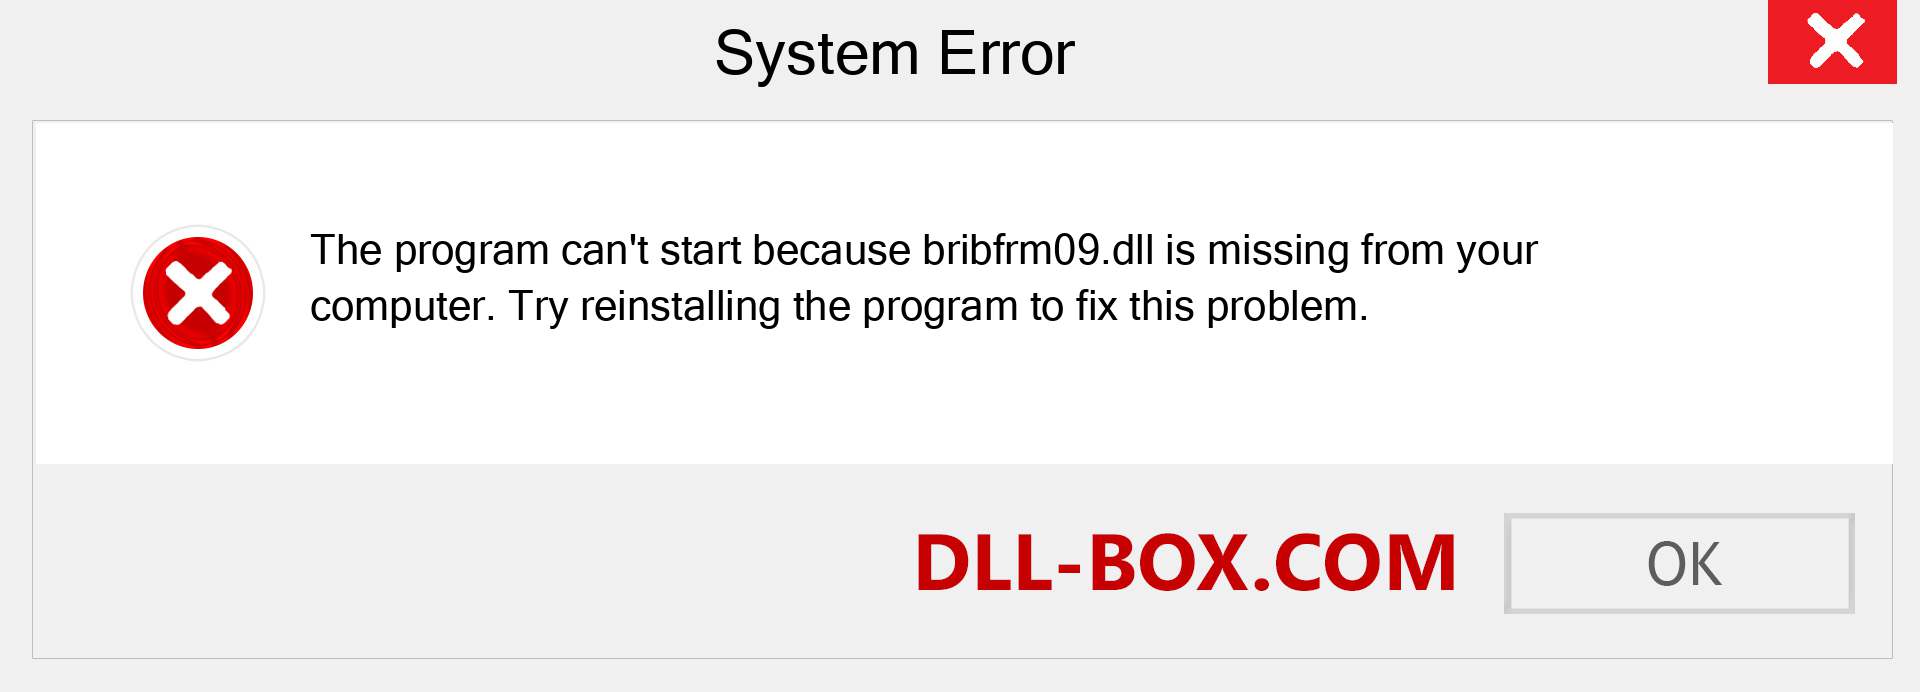  bribfrm09.dll file is missing?. Download for Windows 7, 8, 10 - Fix  bribfrm09 dll Missing Error on Windows, photos, images